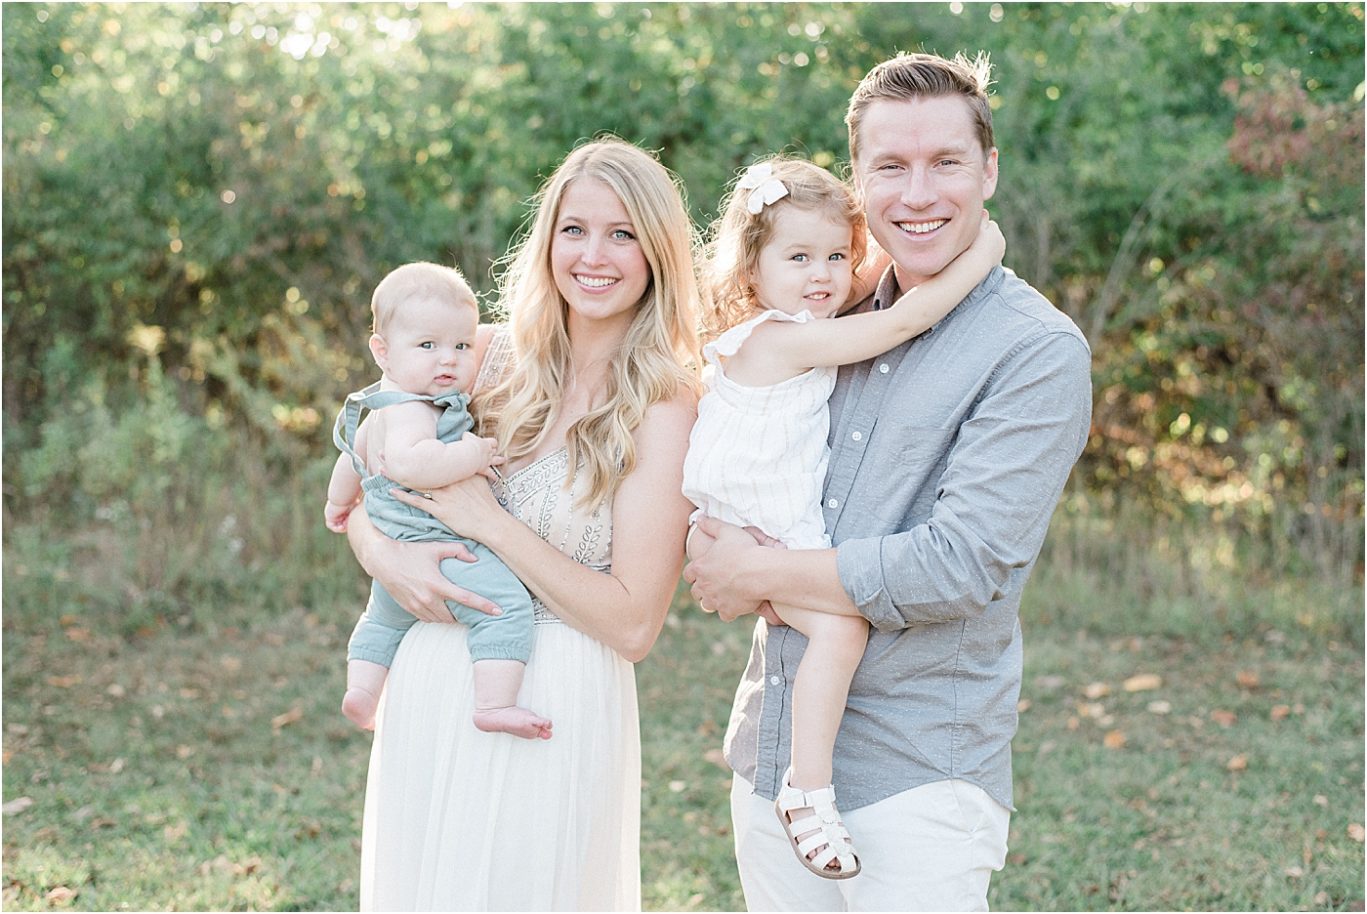 Family portrait at sunset with Noblesville IN Family Photographer, Lindsay Konopa Photography.